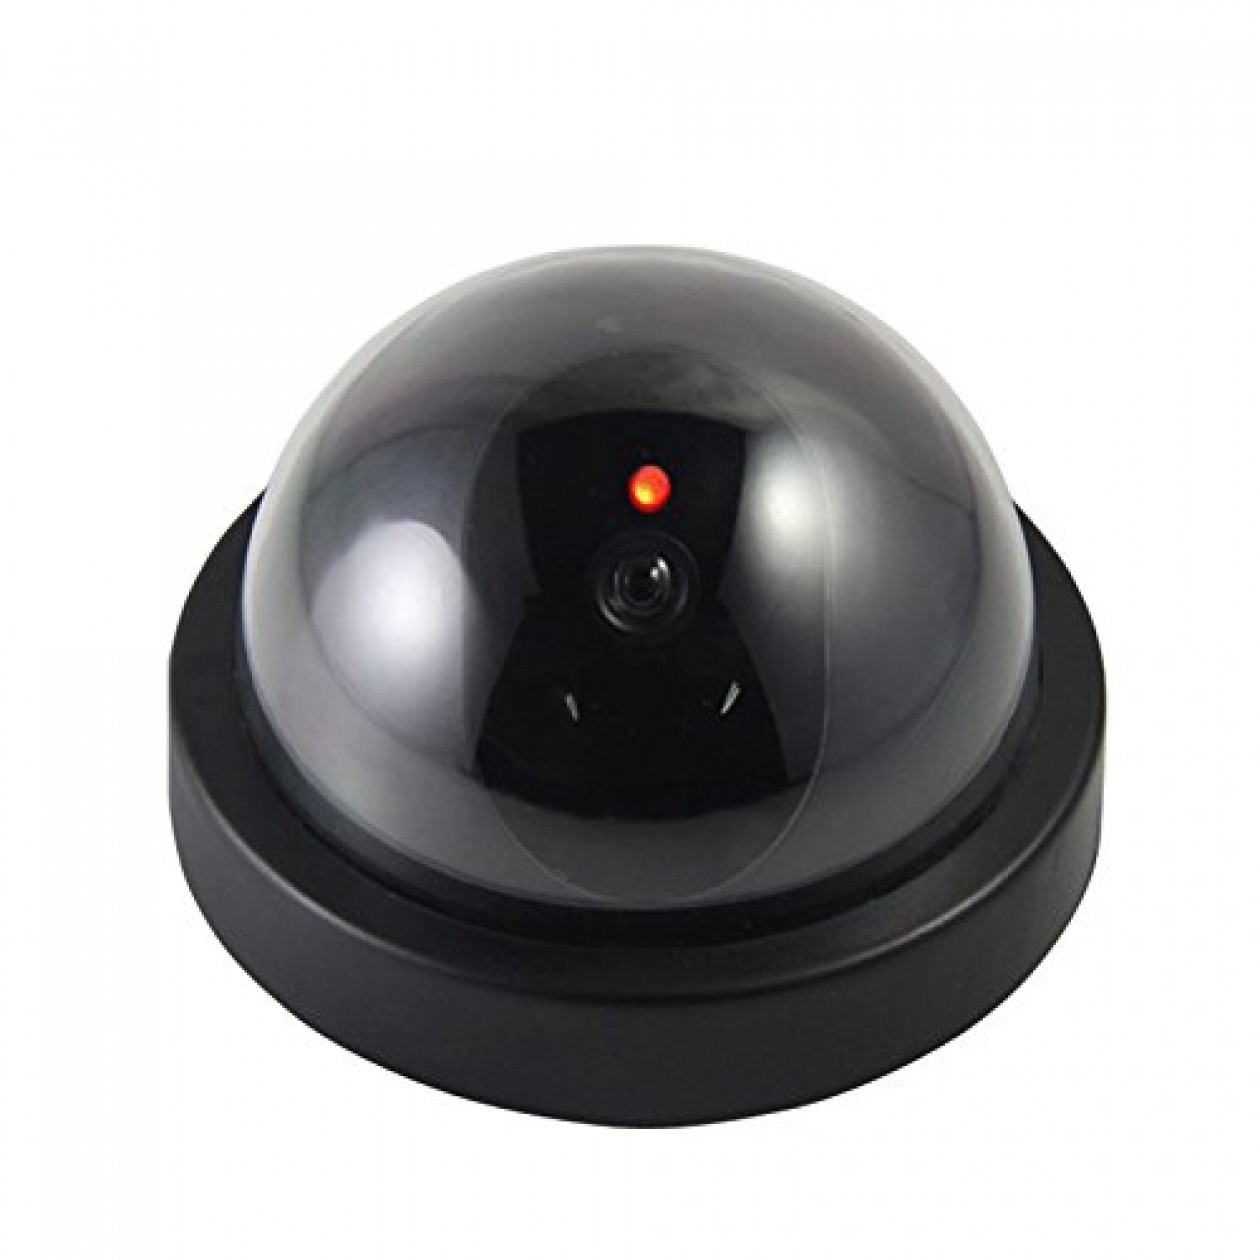 Quality Dummy Dome Fake Outdoor Indoor CCTV Security Camera x 2